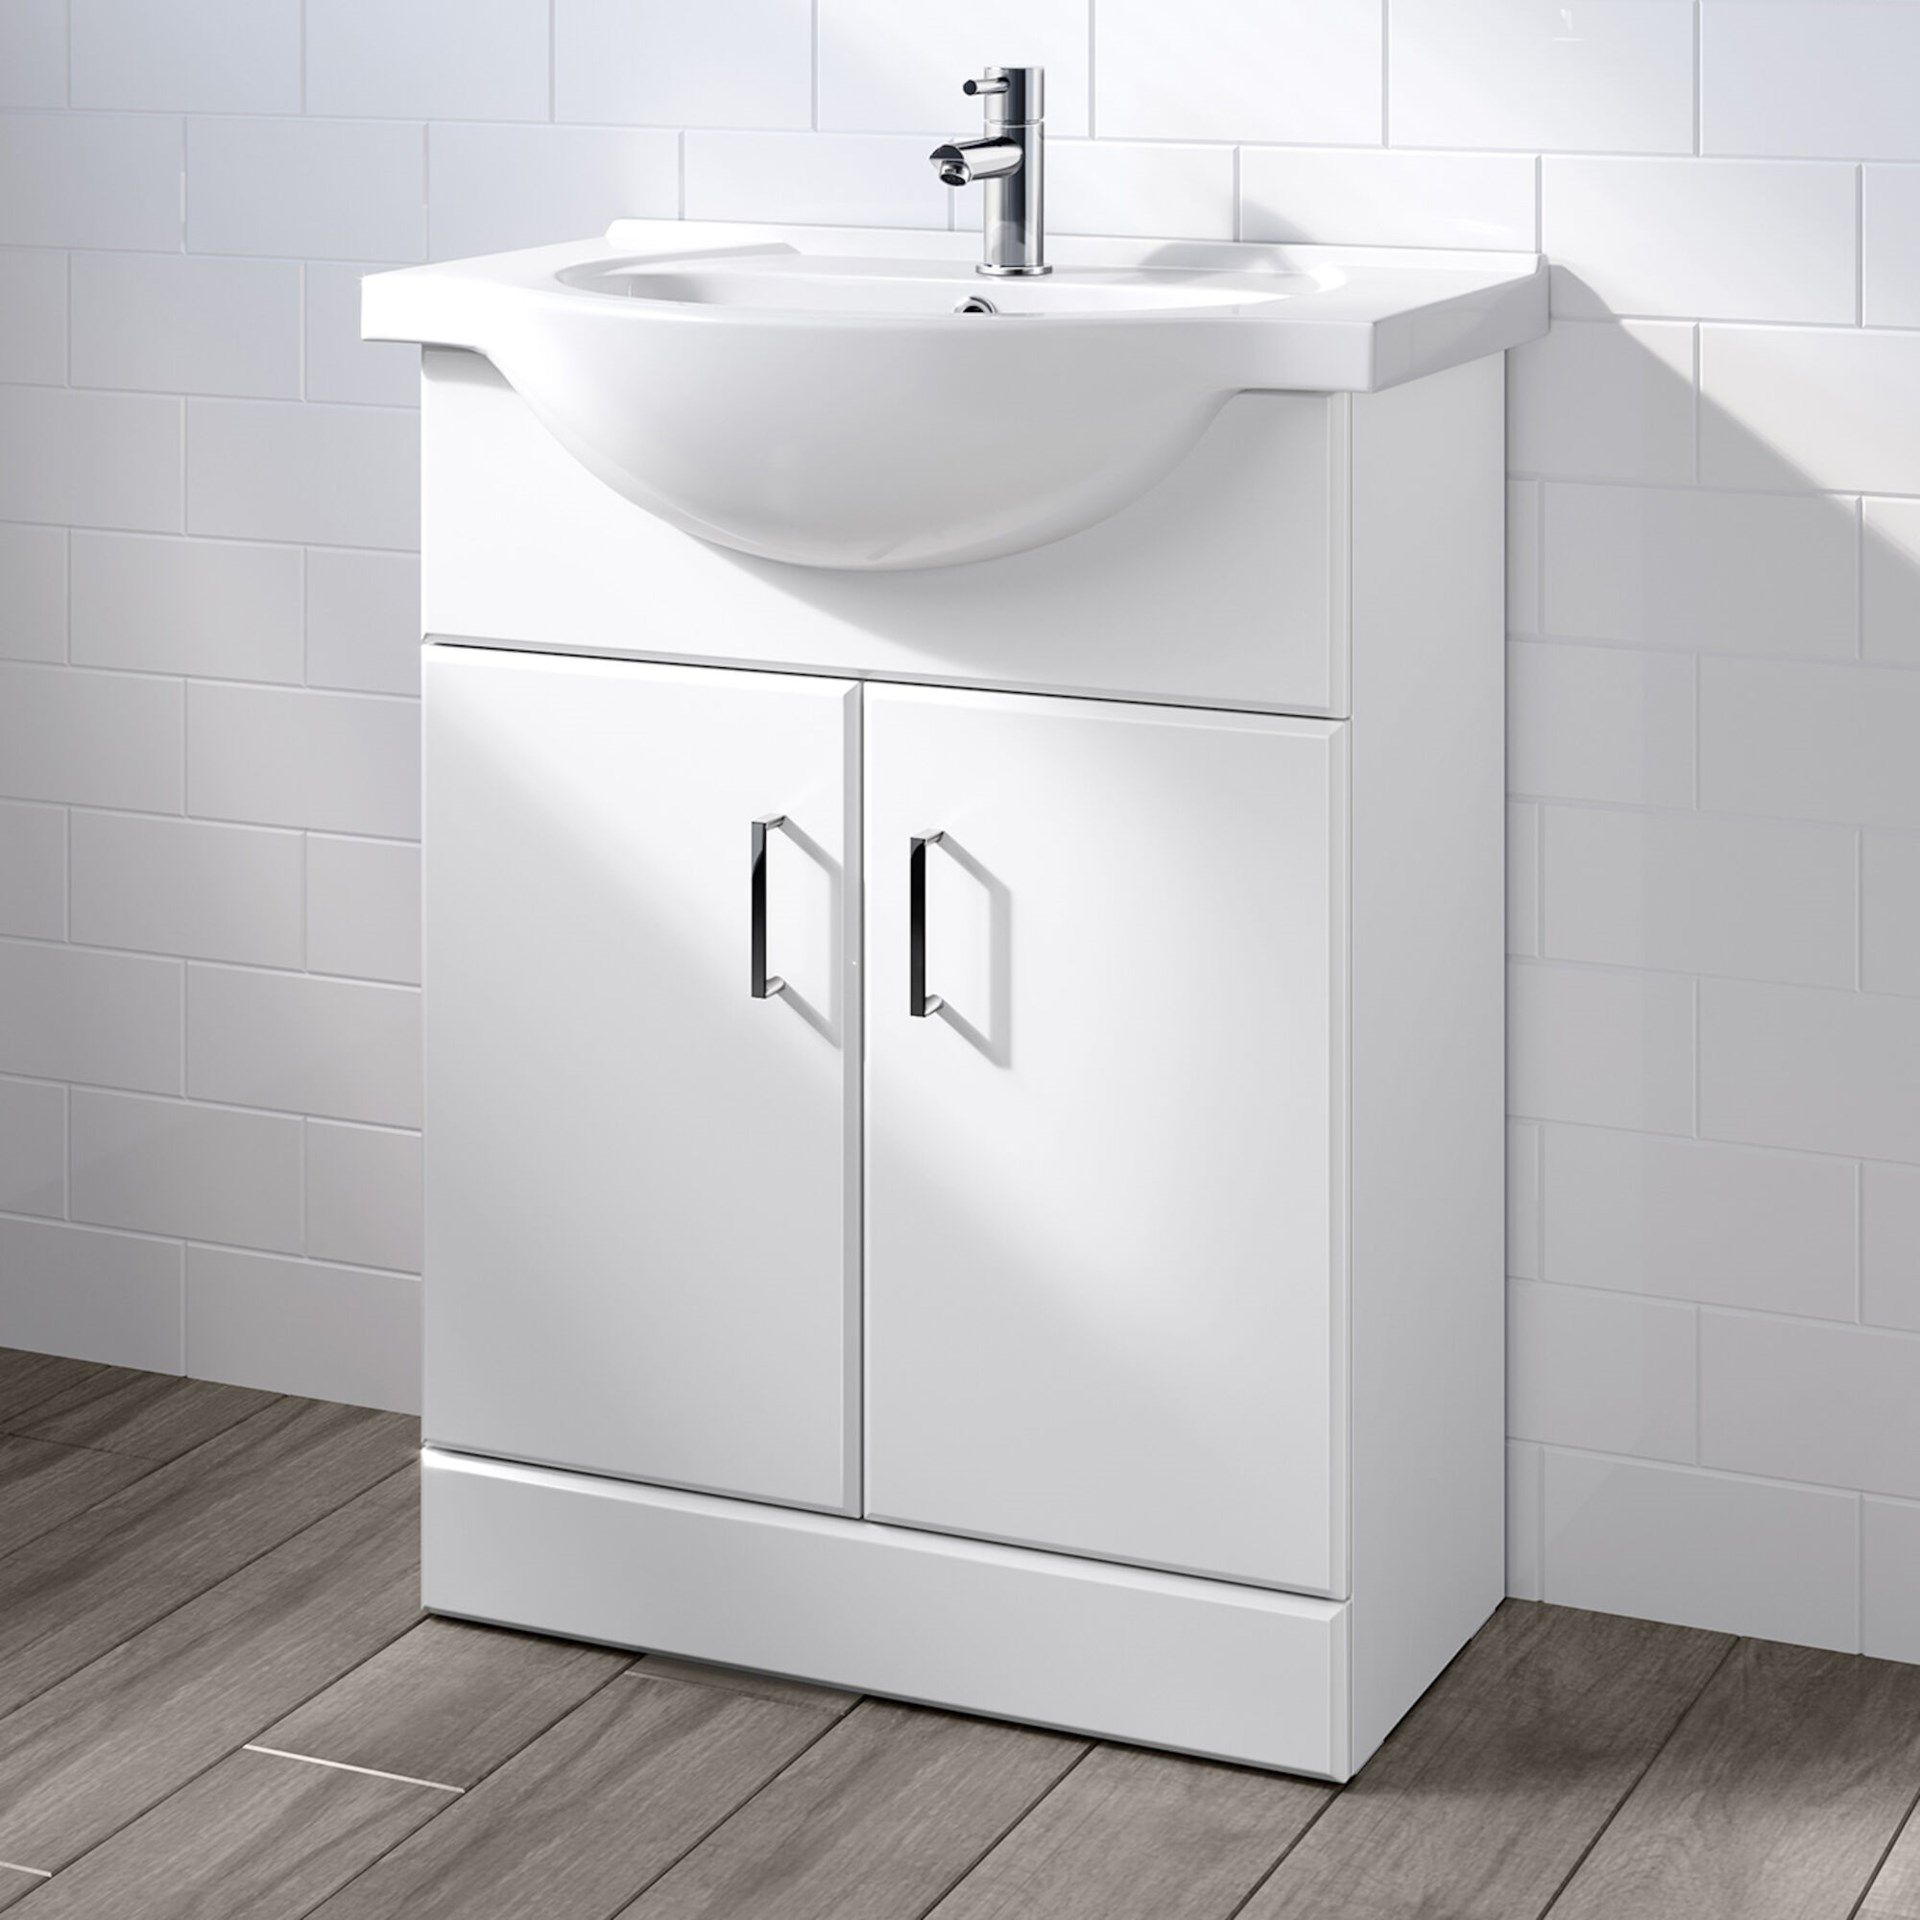 (TT150) 550mm Quartz Gloss White Built In Basin Cabinet. RRP £349.99. Comes complete with basi...